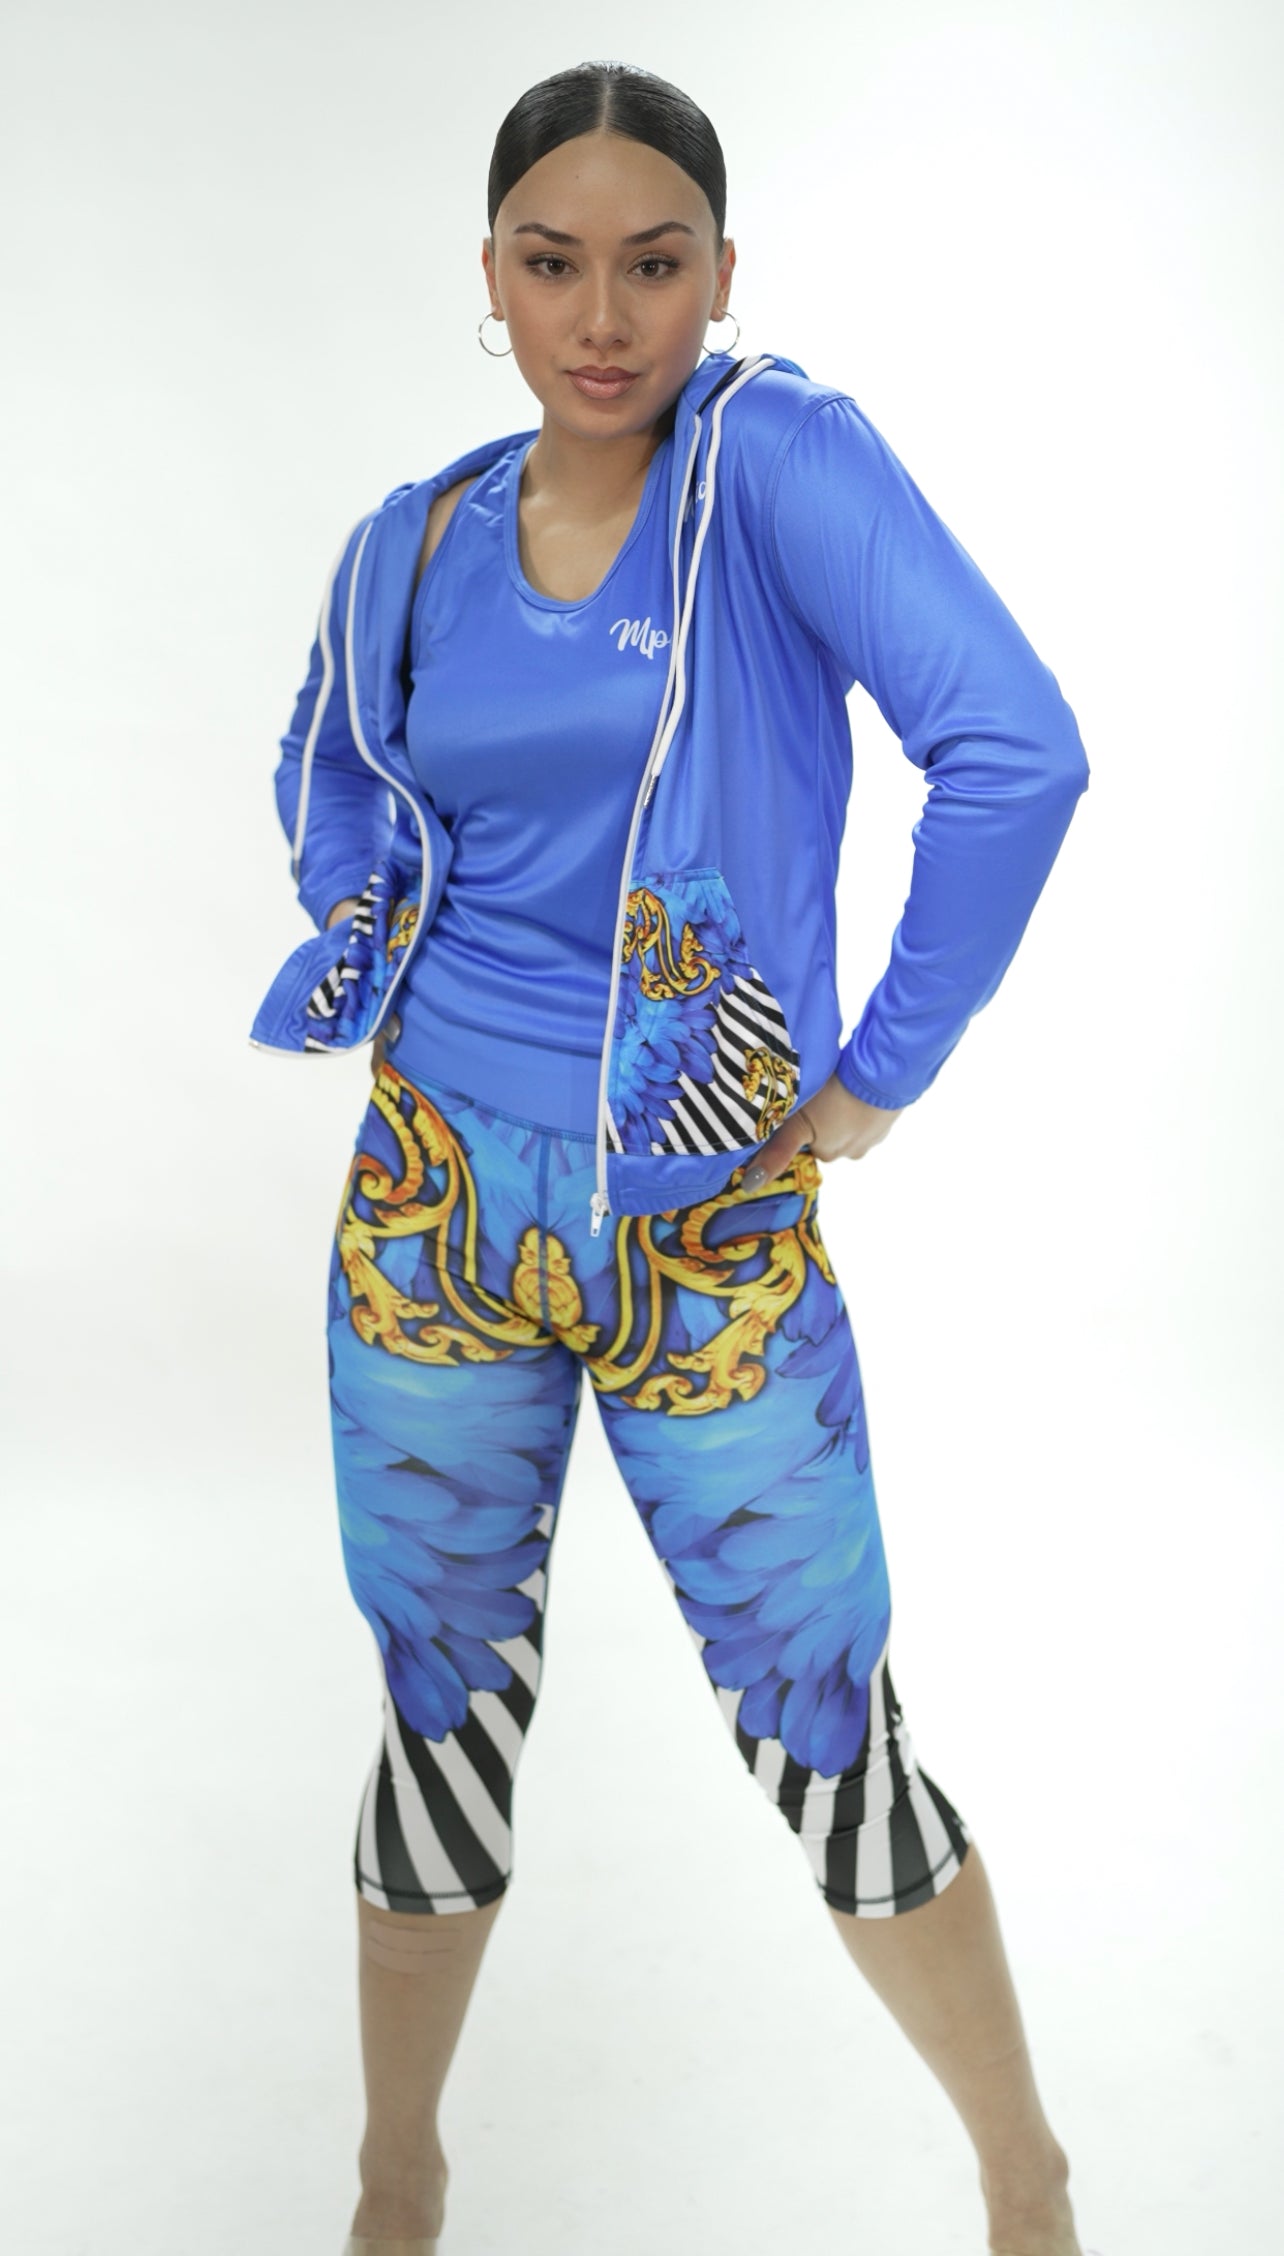 Mperial Feather Leggings (royal)